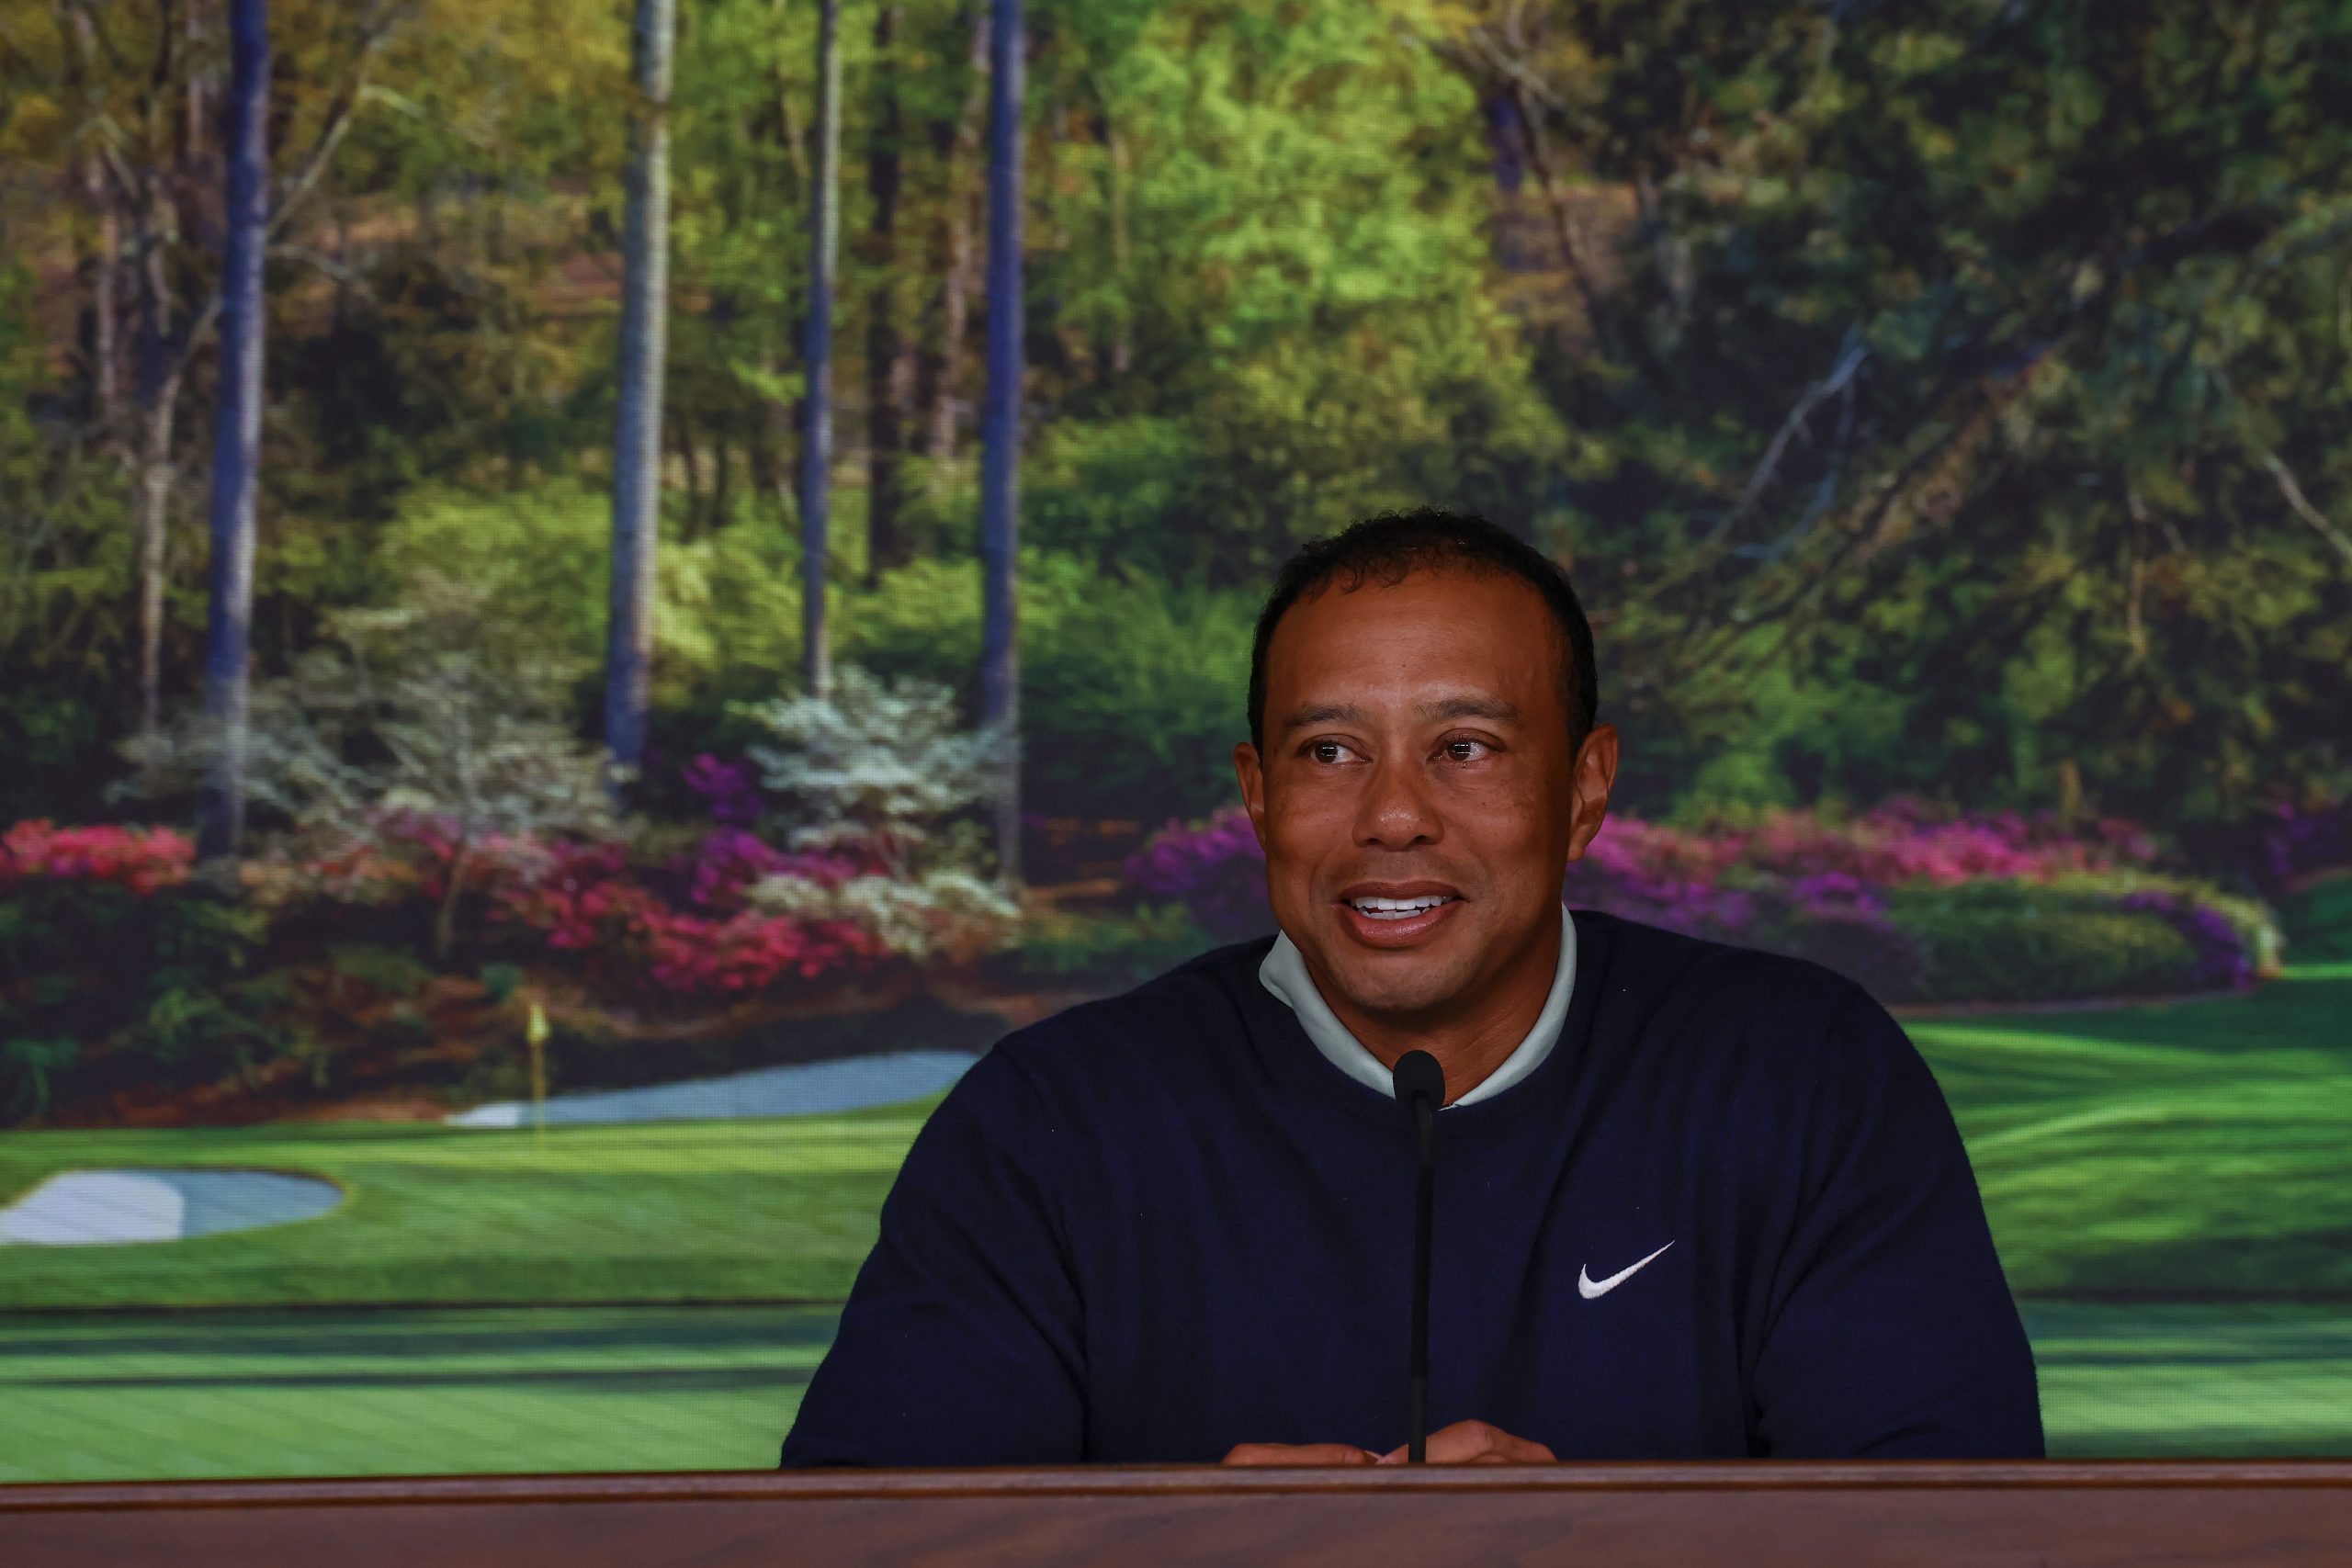 72 holes is a long road but Woods is ready to walk it, tee up and expects to win